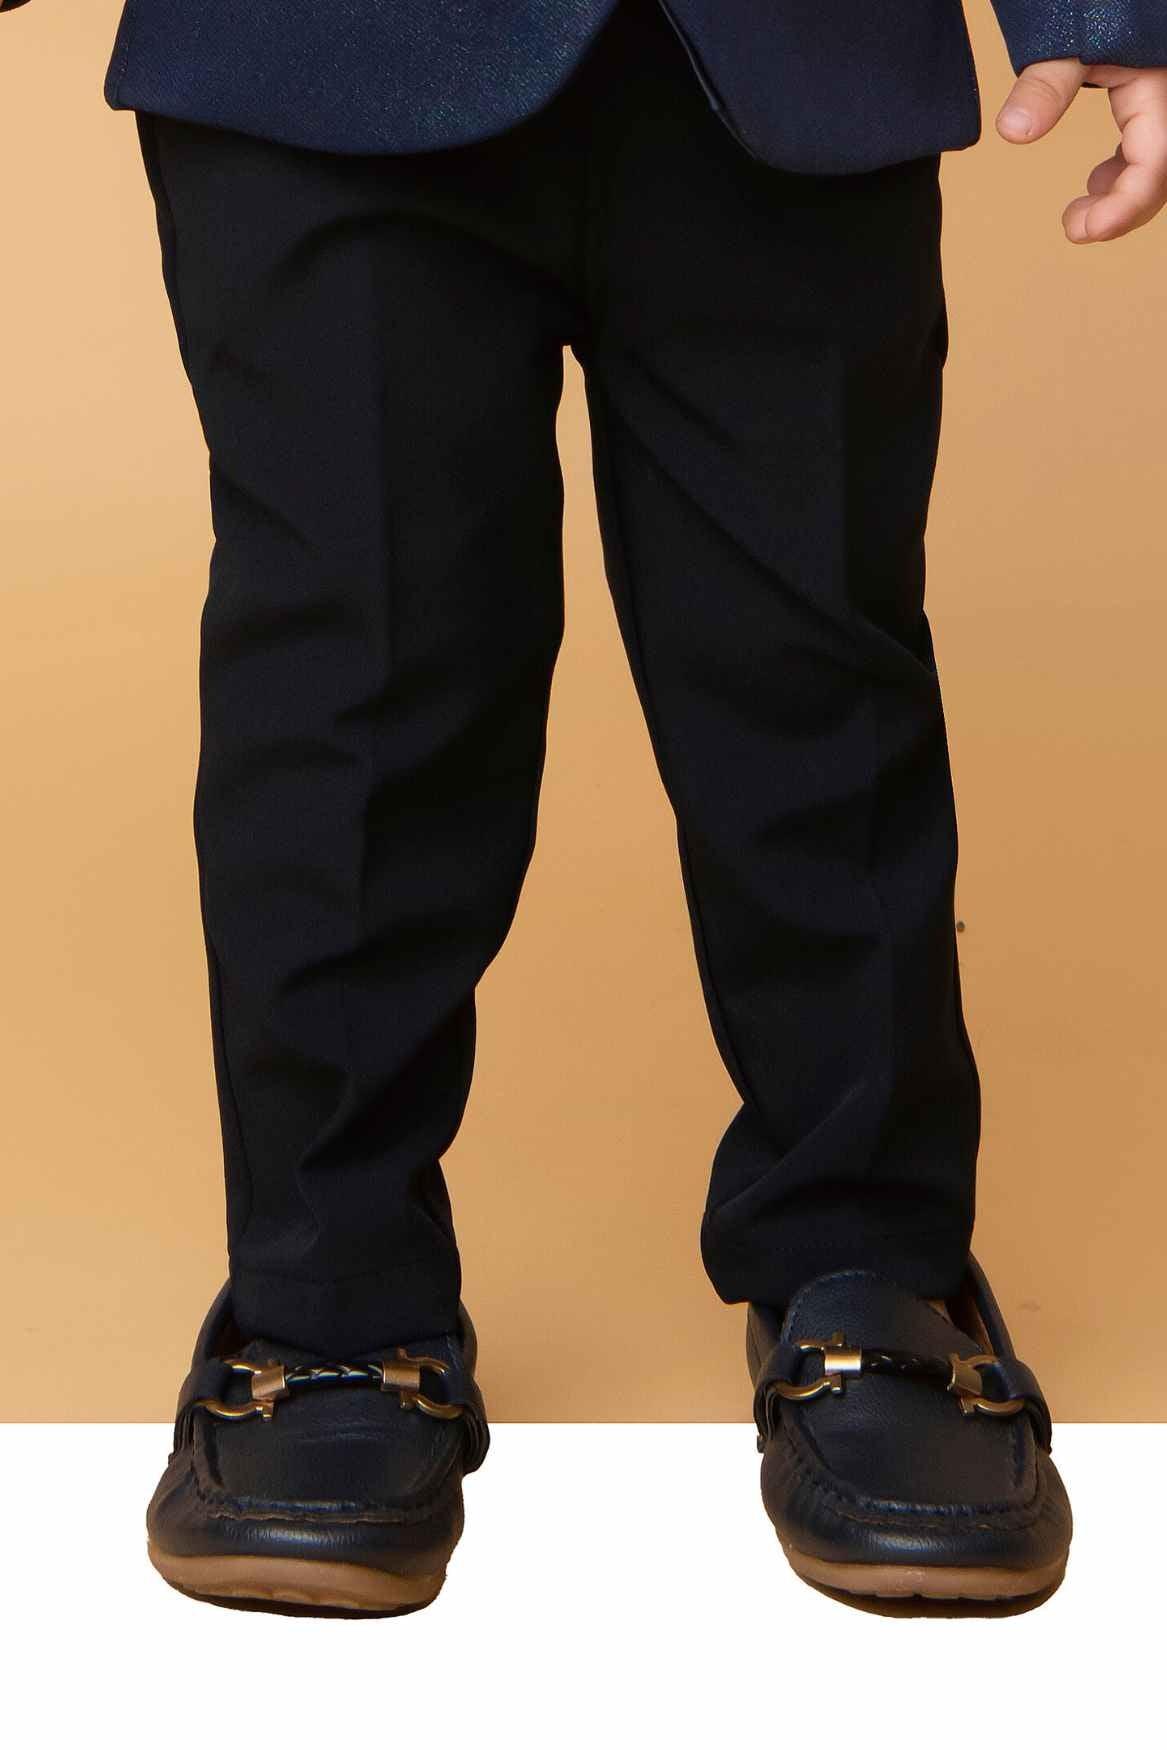 Little Collar's Navy Blue Tuxedo Suit With Bow For Boys - Lagorii Kids